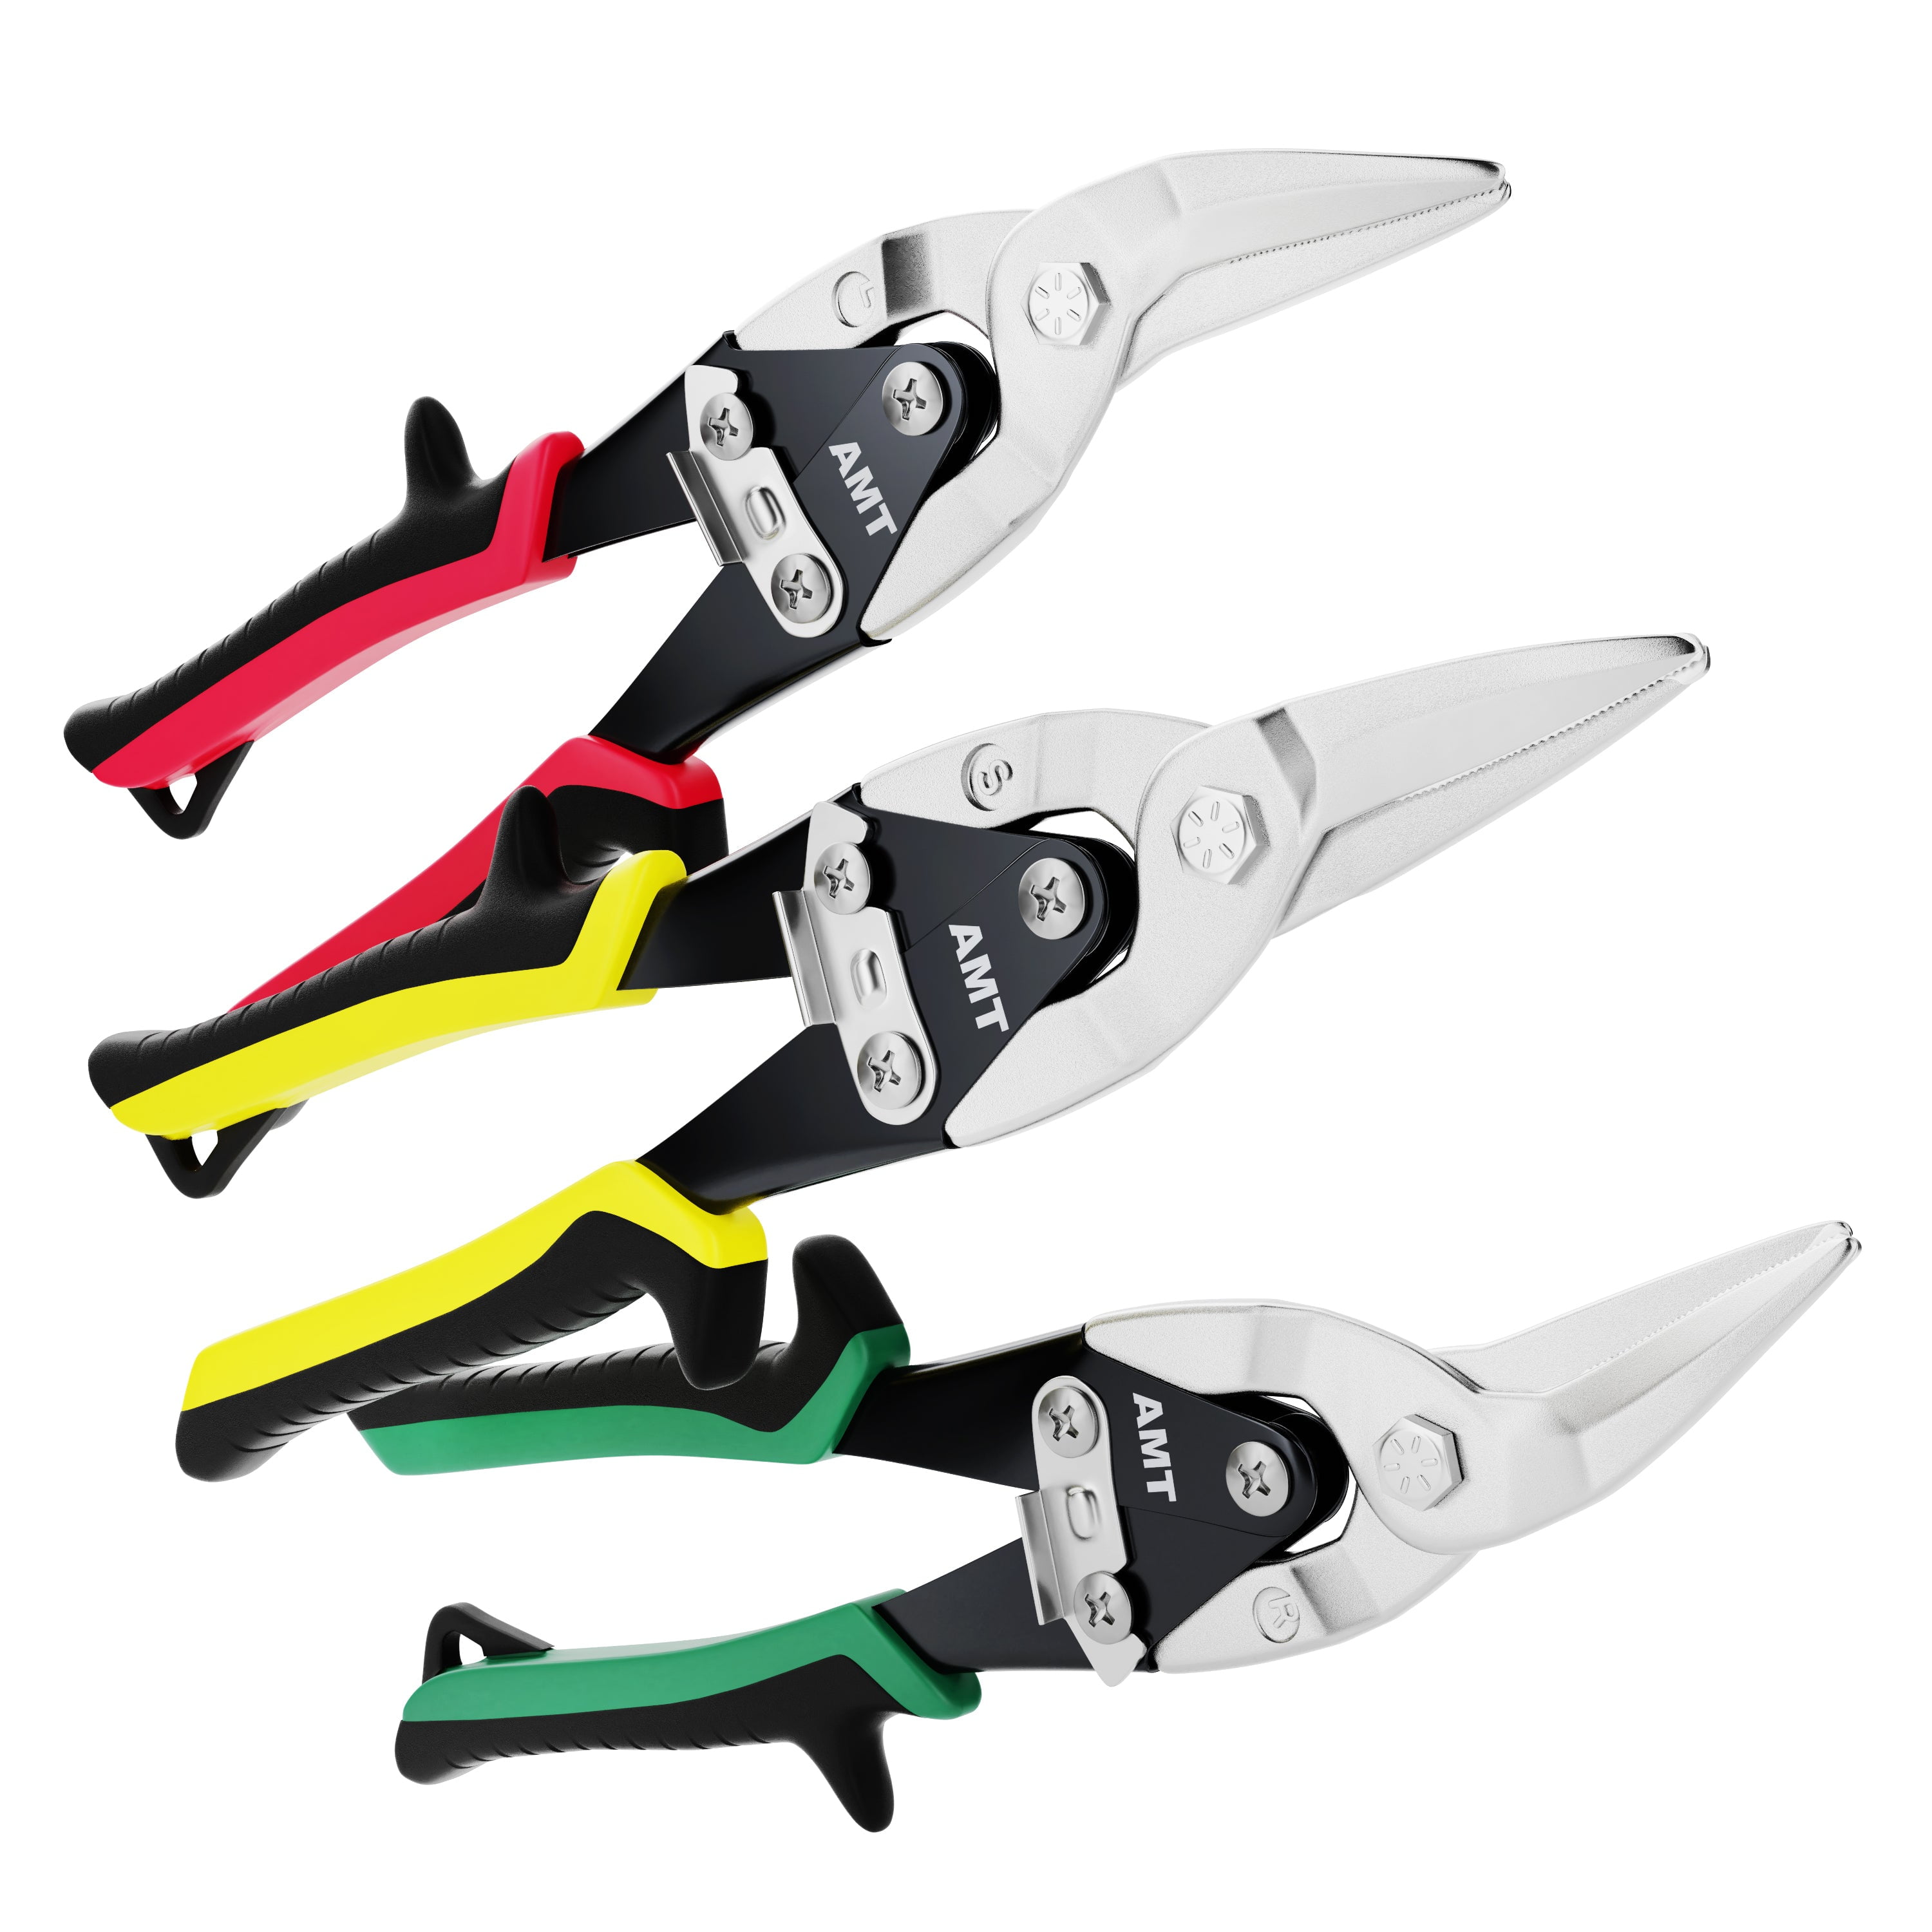 Buy the Great Neck T10SC Tin Snips ~ 10 Inch